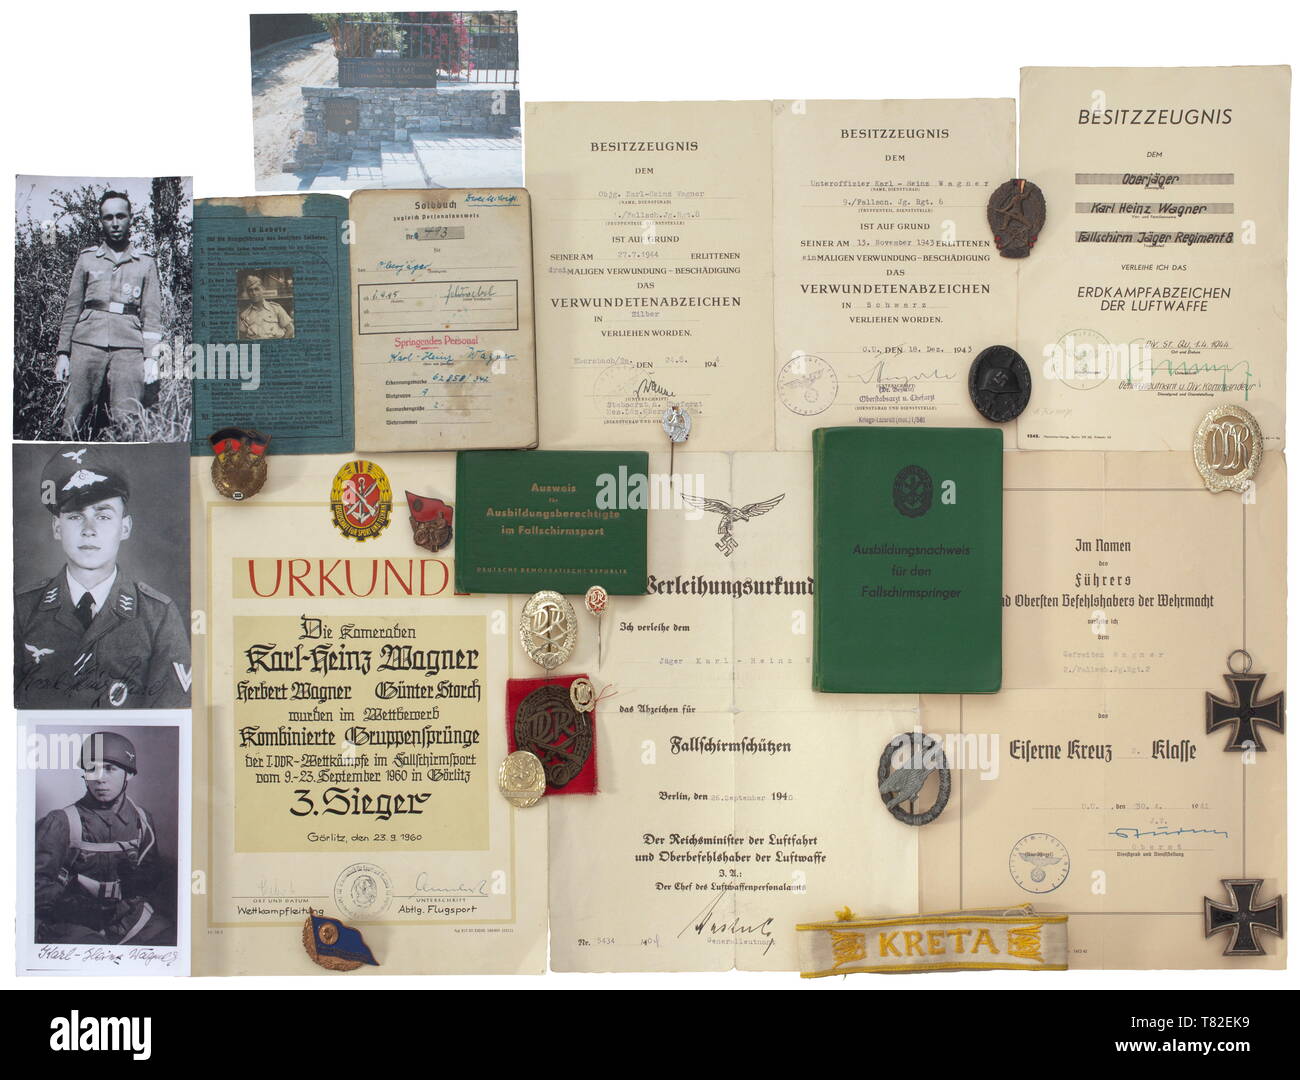 The estate of paratrooper Karl-Heinz Wagner Consisting of a Crete sleeveband (used, 43 cm in length), a Paratrooper's Badge in zinc (denazified, repaired), a Wound Badge in Black, an Iron Cross 2nd Class and an Iron Cross 1st Class (denazified) as well as various badges and pins from Wagner's time in the GDR. Also four decorations of his father (Honour Badge with document, EK II etc.), a pay book with the front denazified with photo in uniform and entries for awards (Paratrooper's Badge, EK I and EK II, Ground Combat Badge, Crete sleeveband, Clos, Additional-Rights-Clearance-Info-Not-Available Stock Photo